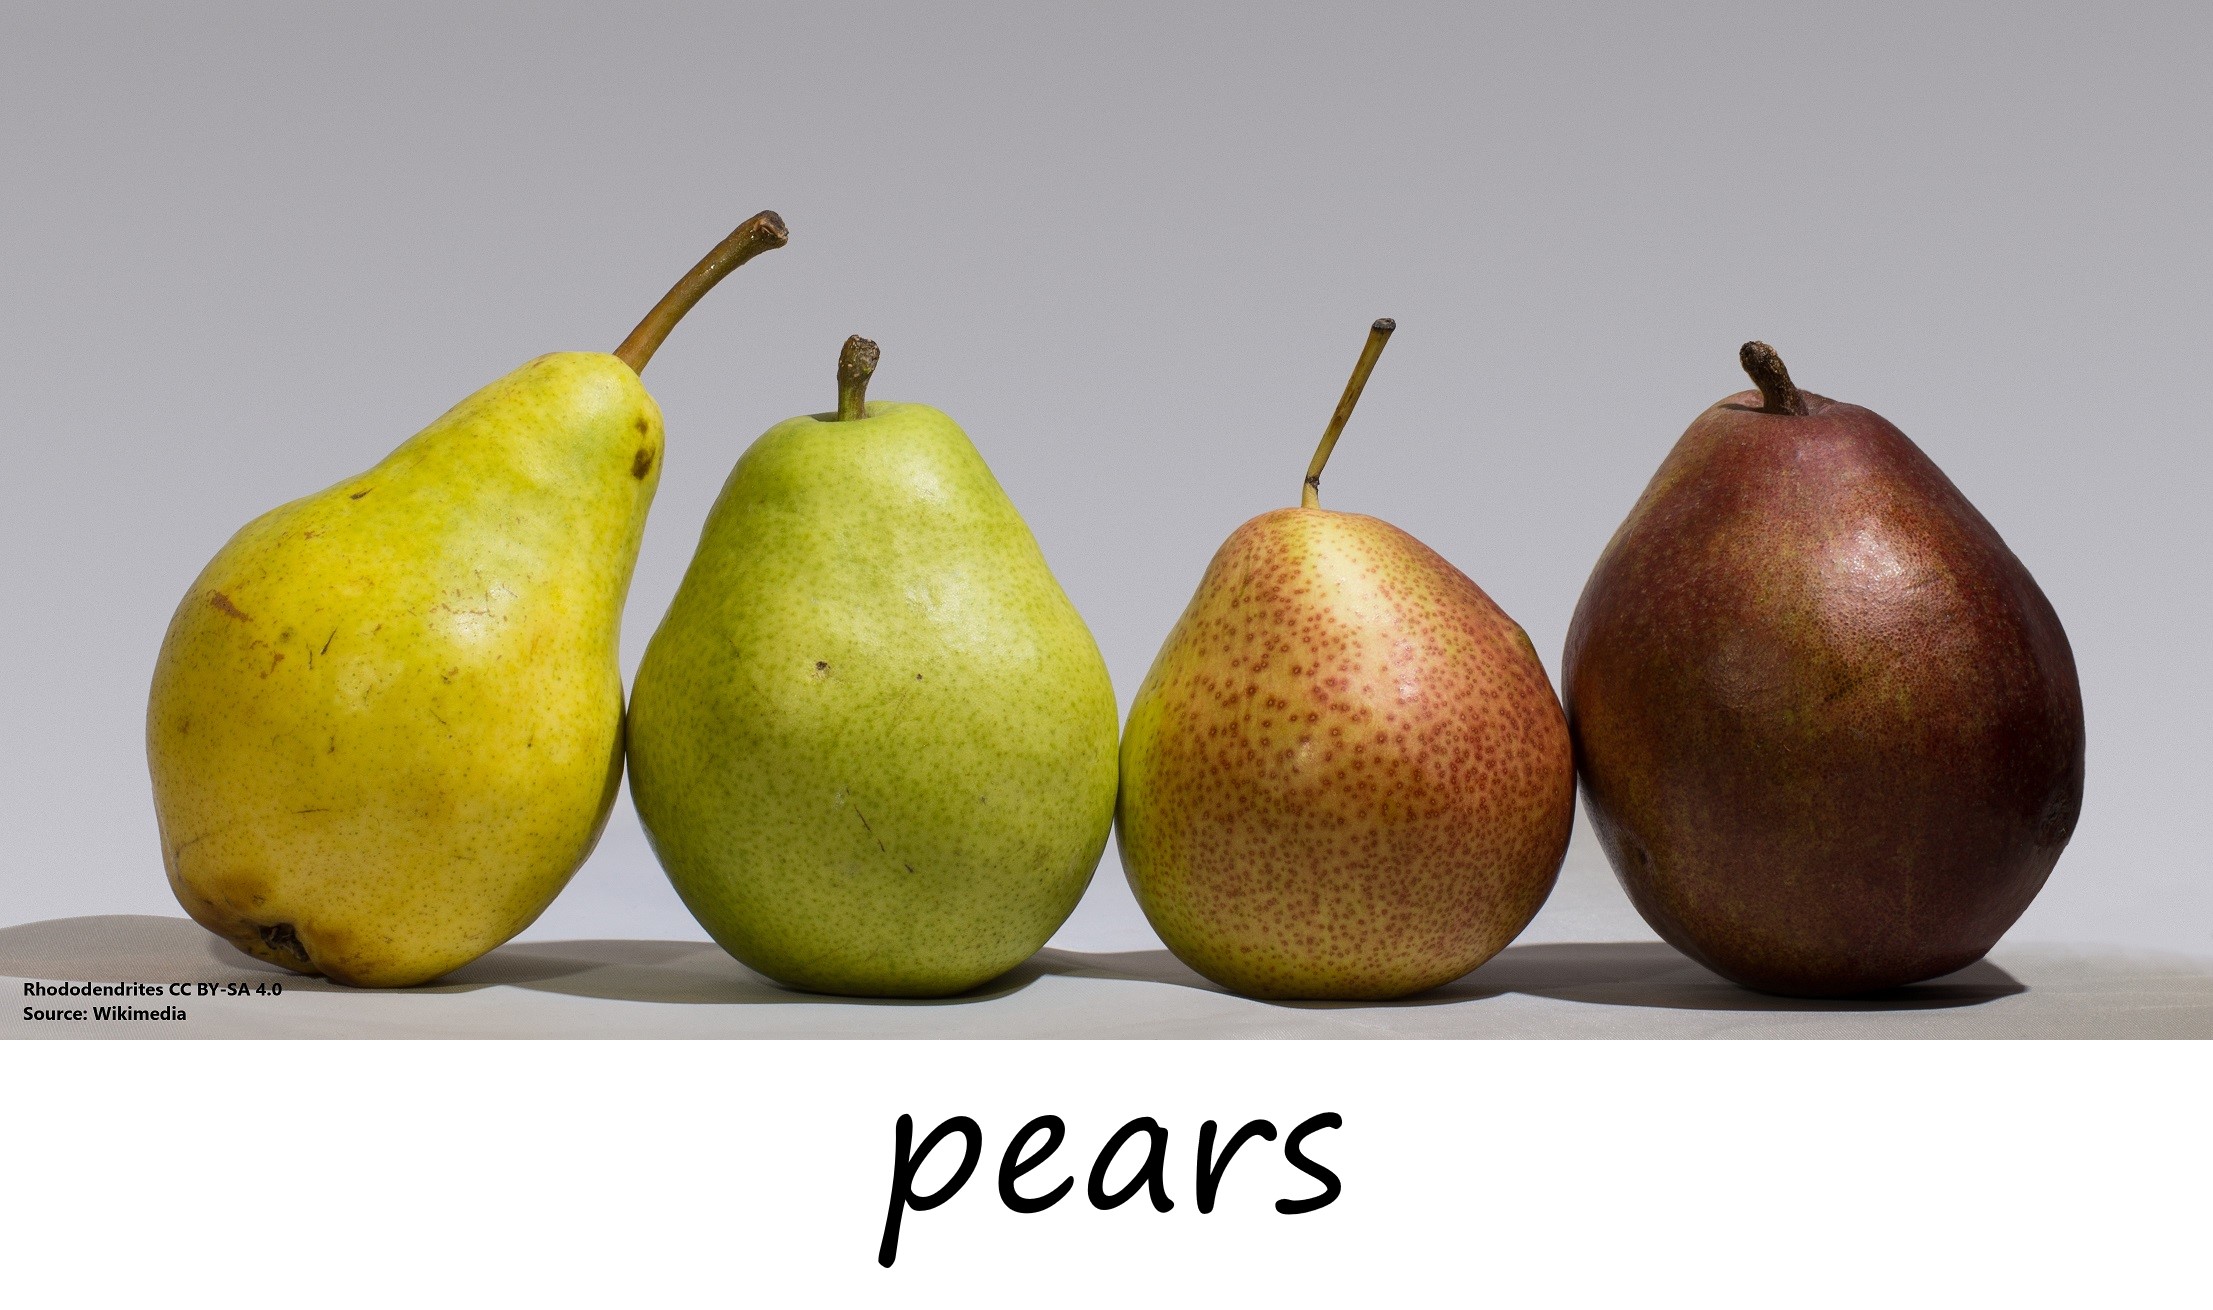 Pears photo with label